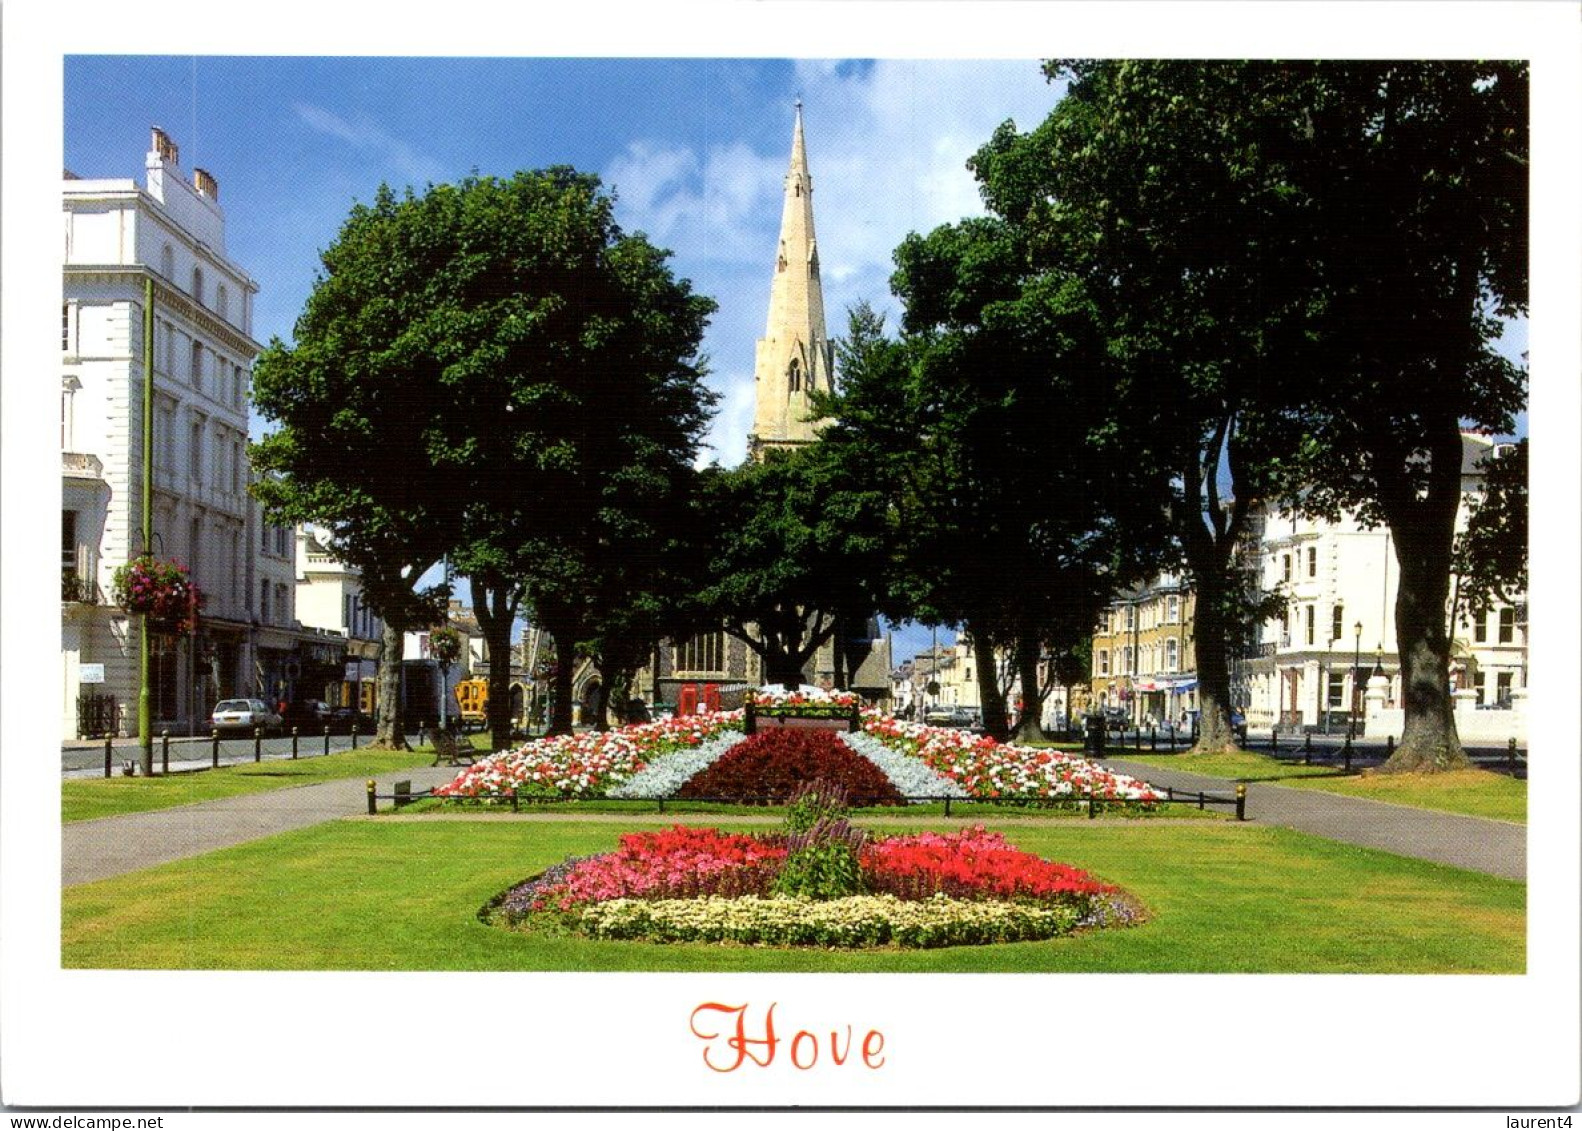 2-5-2024 (3 Z 38) UK - Hove Church - Churches & Cathedrals